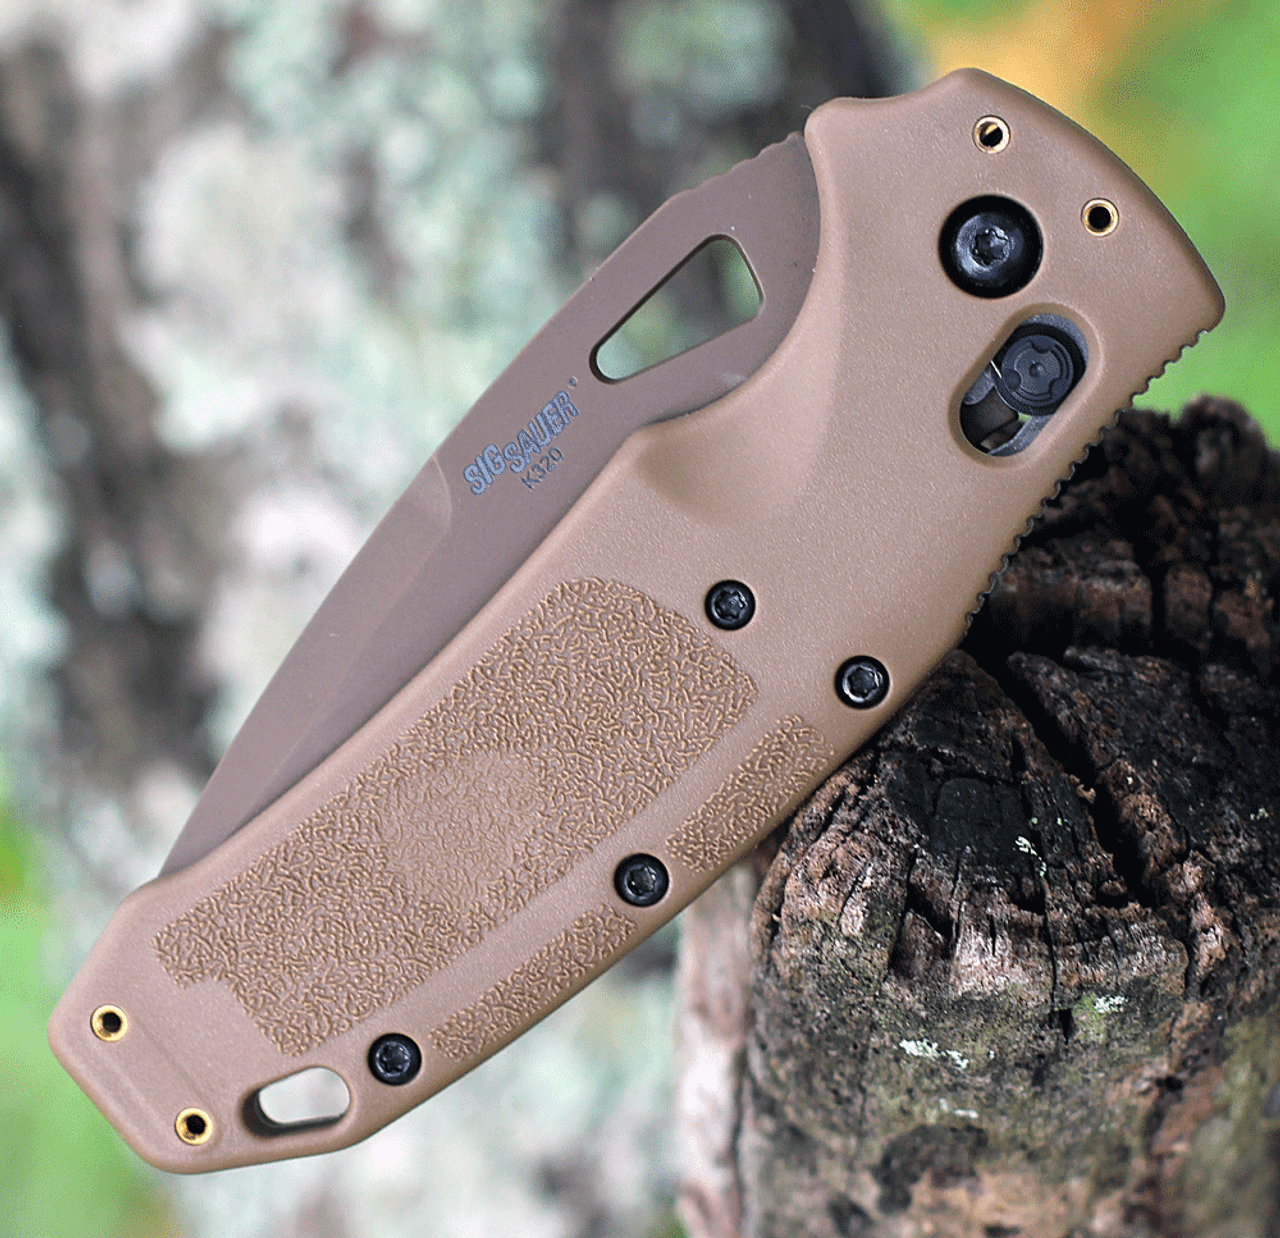 Hogue SIG Sauer K320 M17 - 36373, 3.50" CPM-S30V Coyote Tan PVD Partially Serrated Drop Point Blade, Coyote Tan Polymer Handles